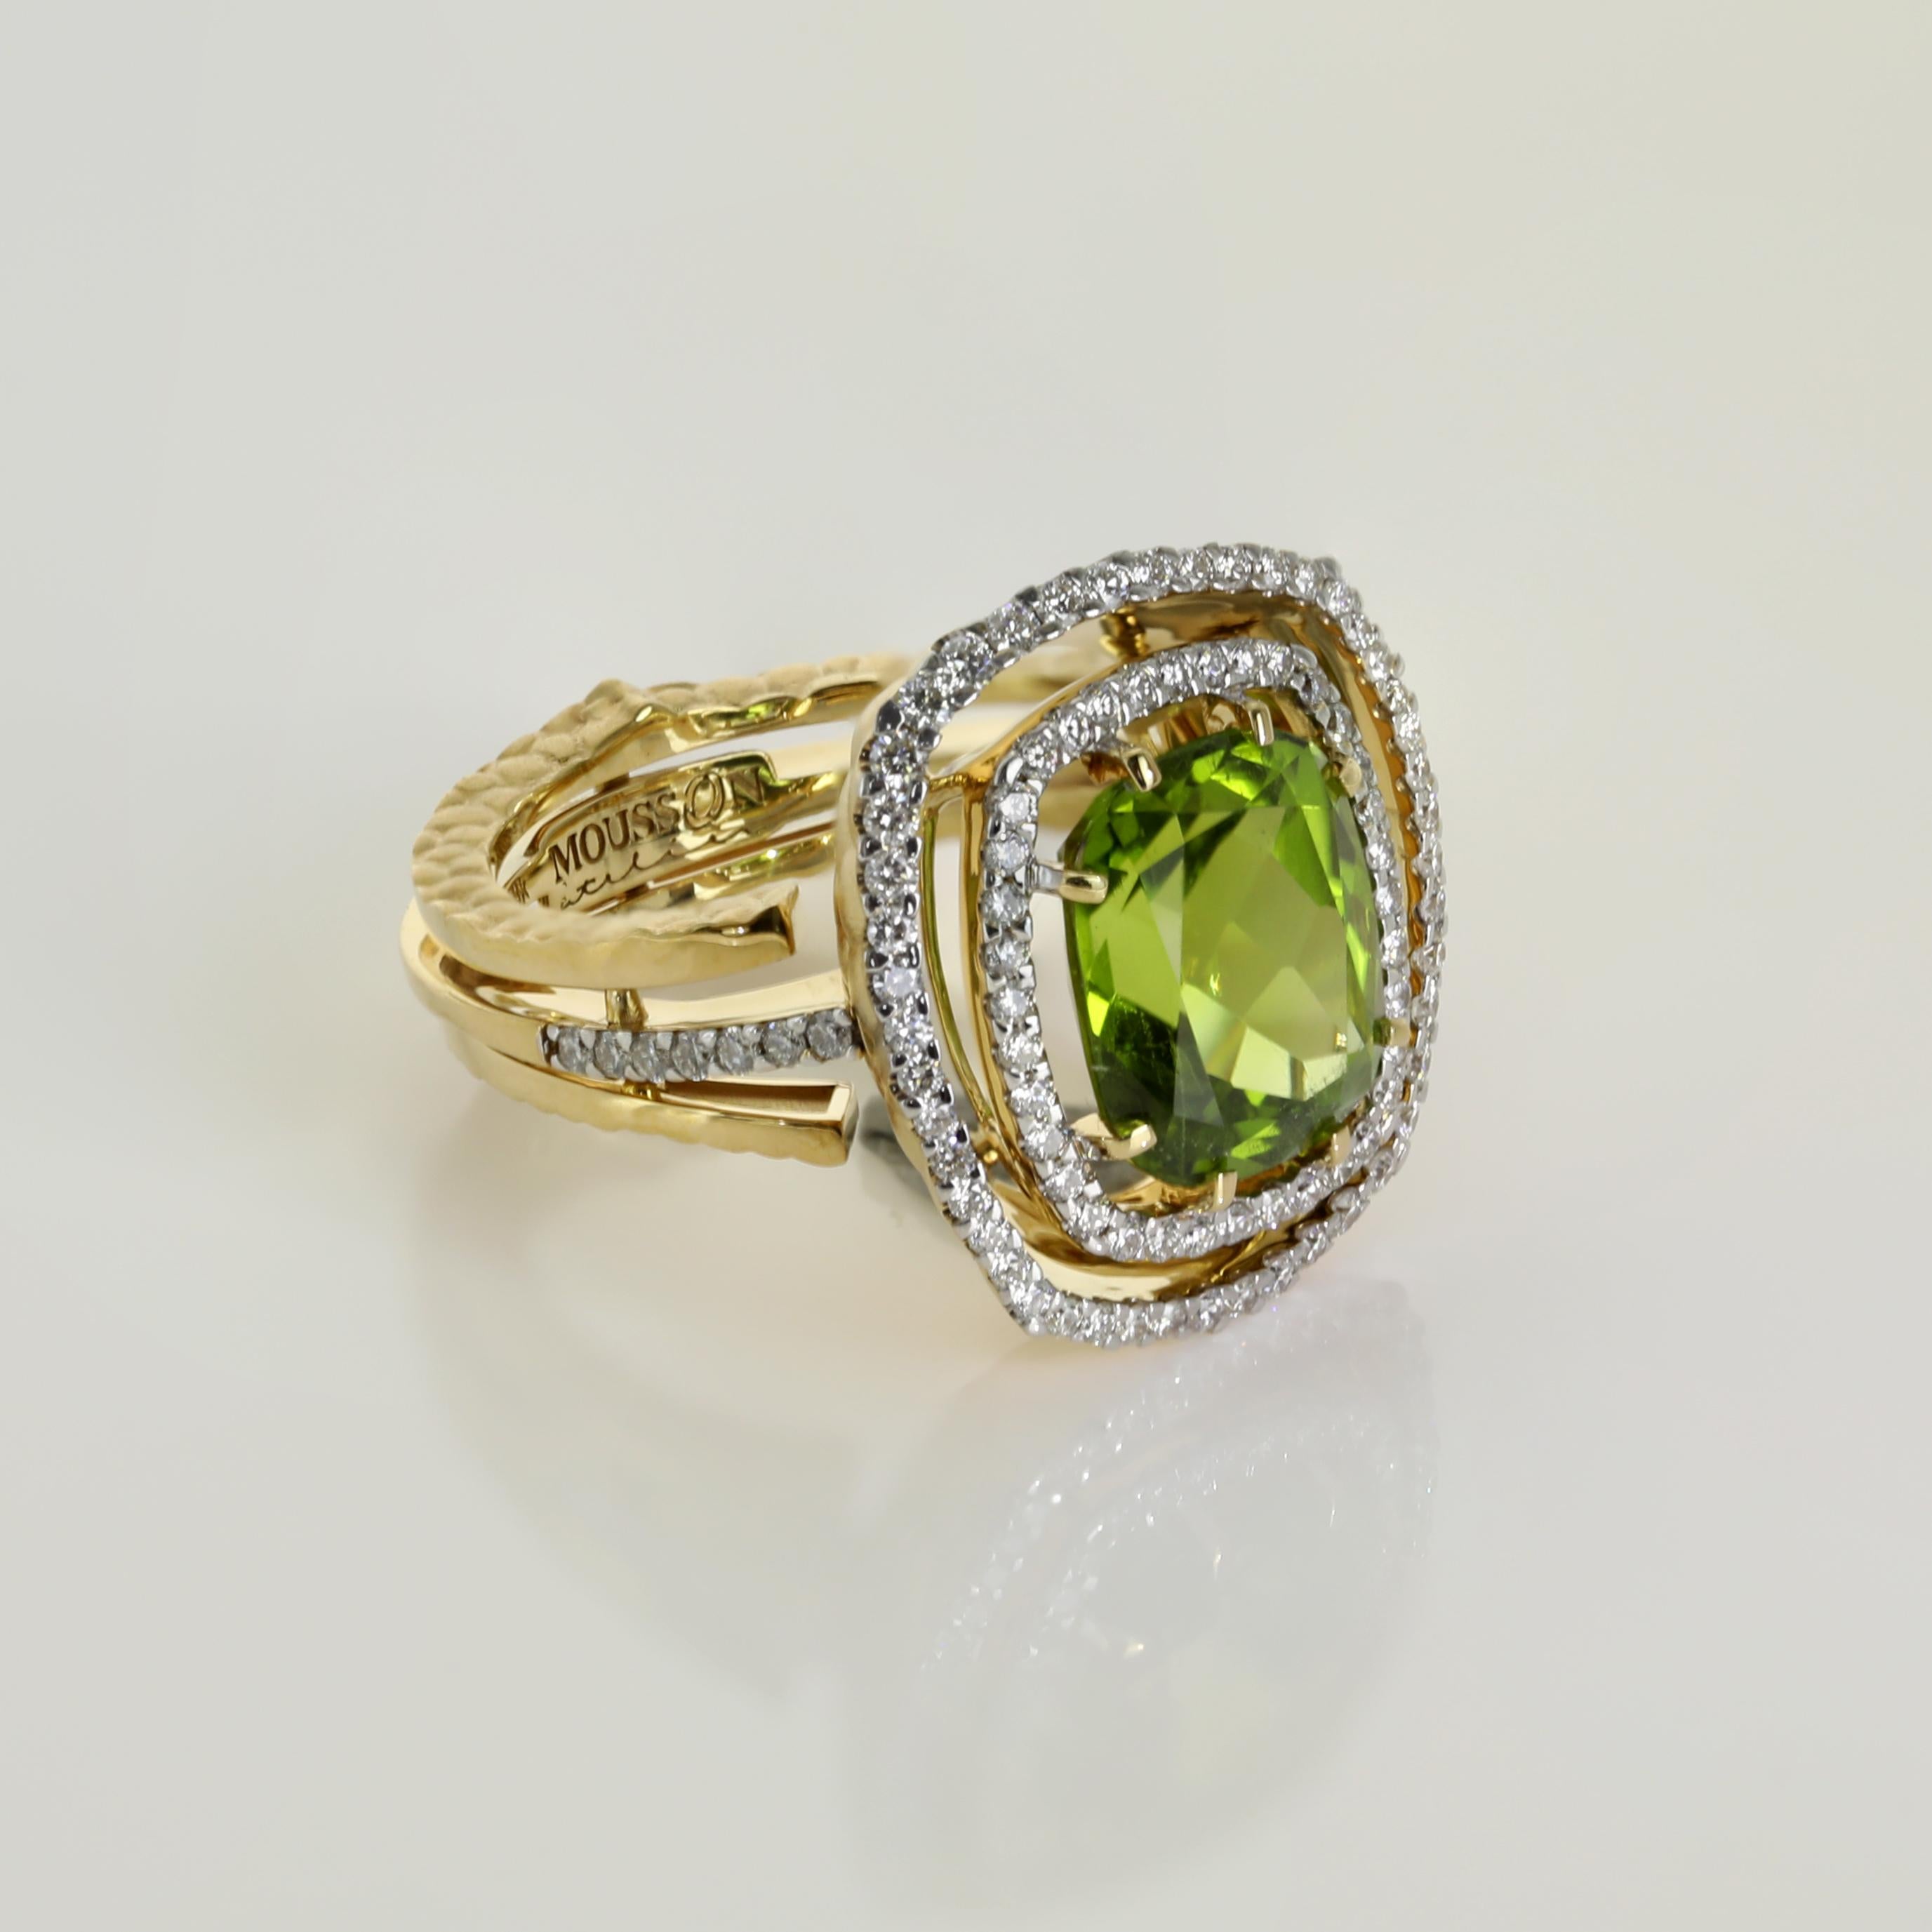 NeoClassical 5,23 carat Peridot and 0.72 carat of Diamond 18 Karat Yellow Gold Ring. With nice texture.
Also accompanied by earrings LU116414707801

18x20.3x29 mm
11.97 gm

US Size 8.0
EU Size 56 1/2